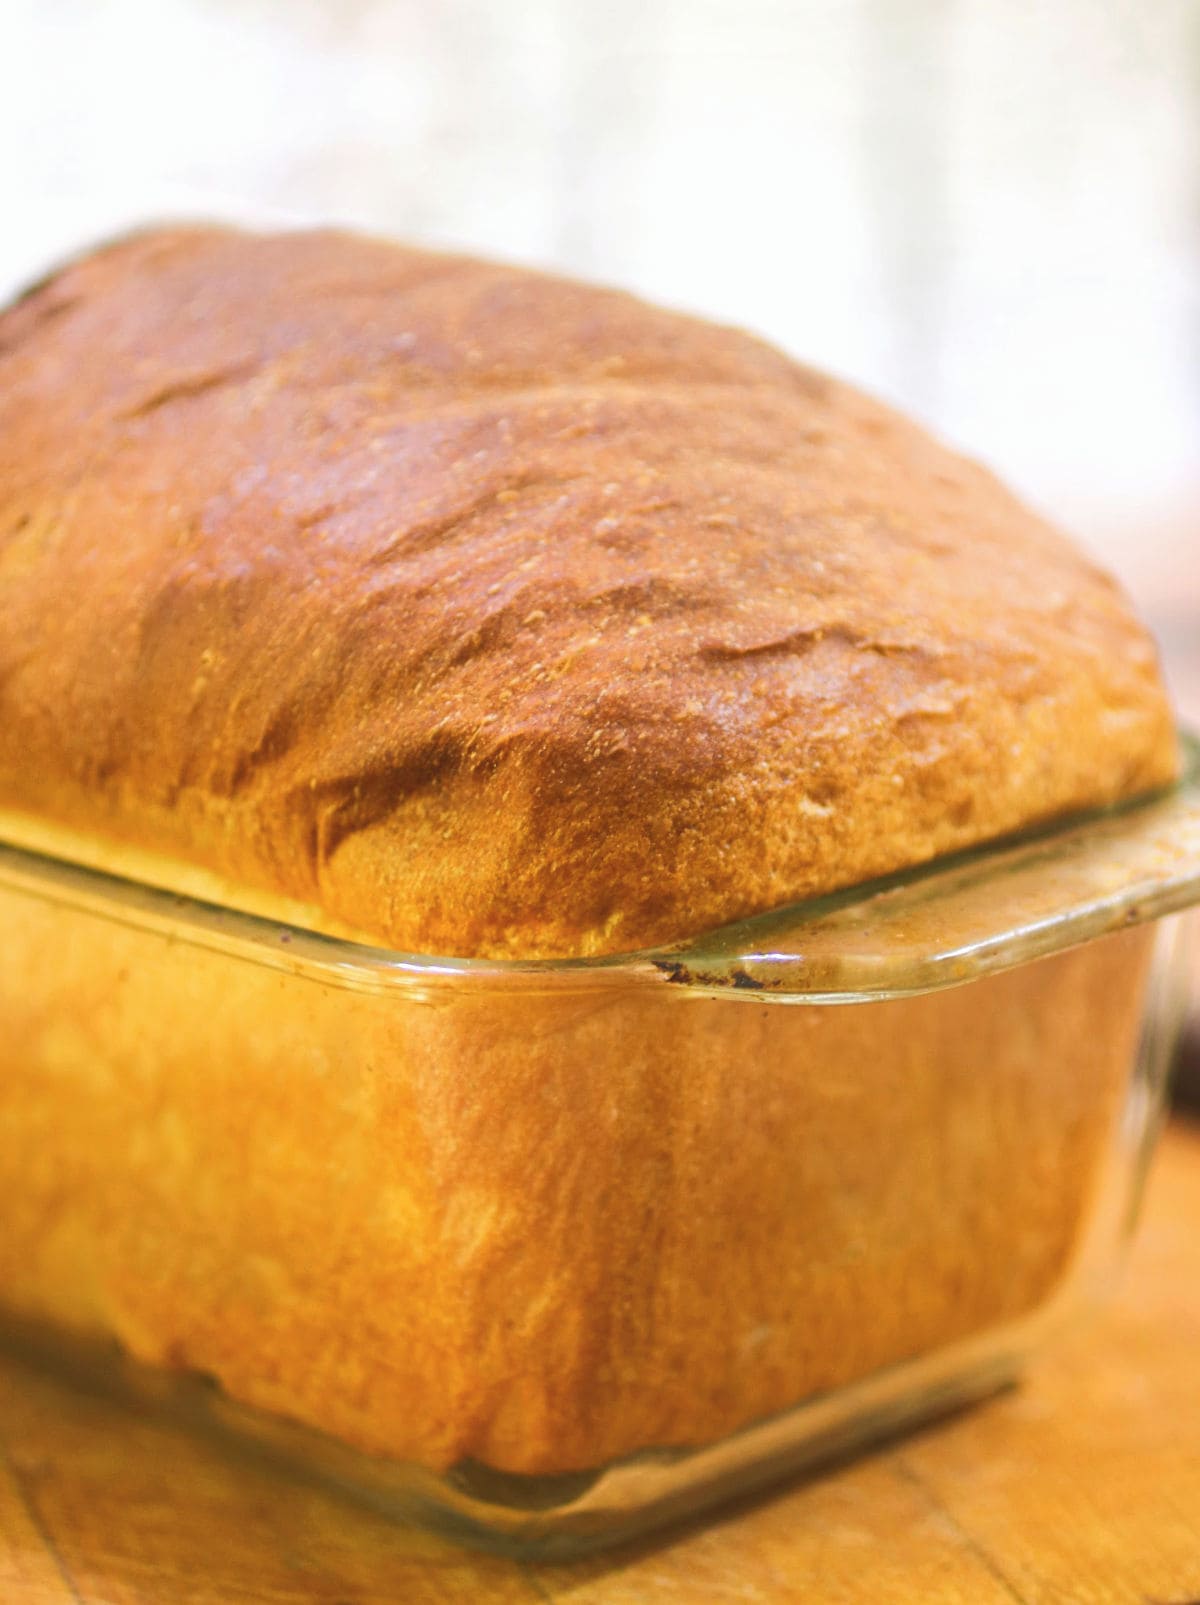 A finished loaf of bread in a glass pan.